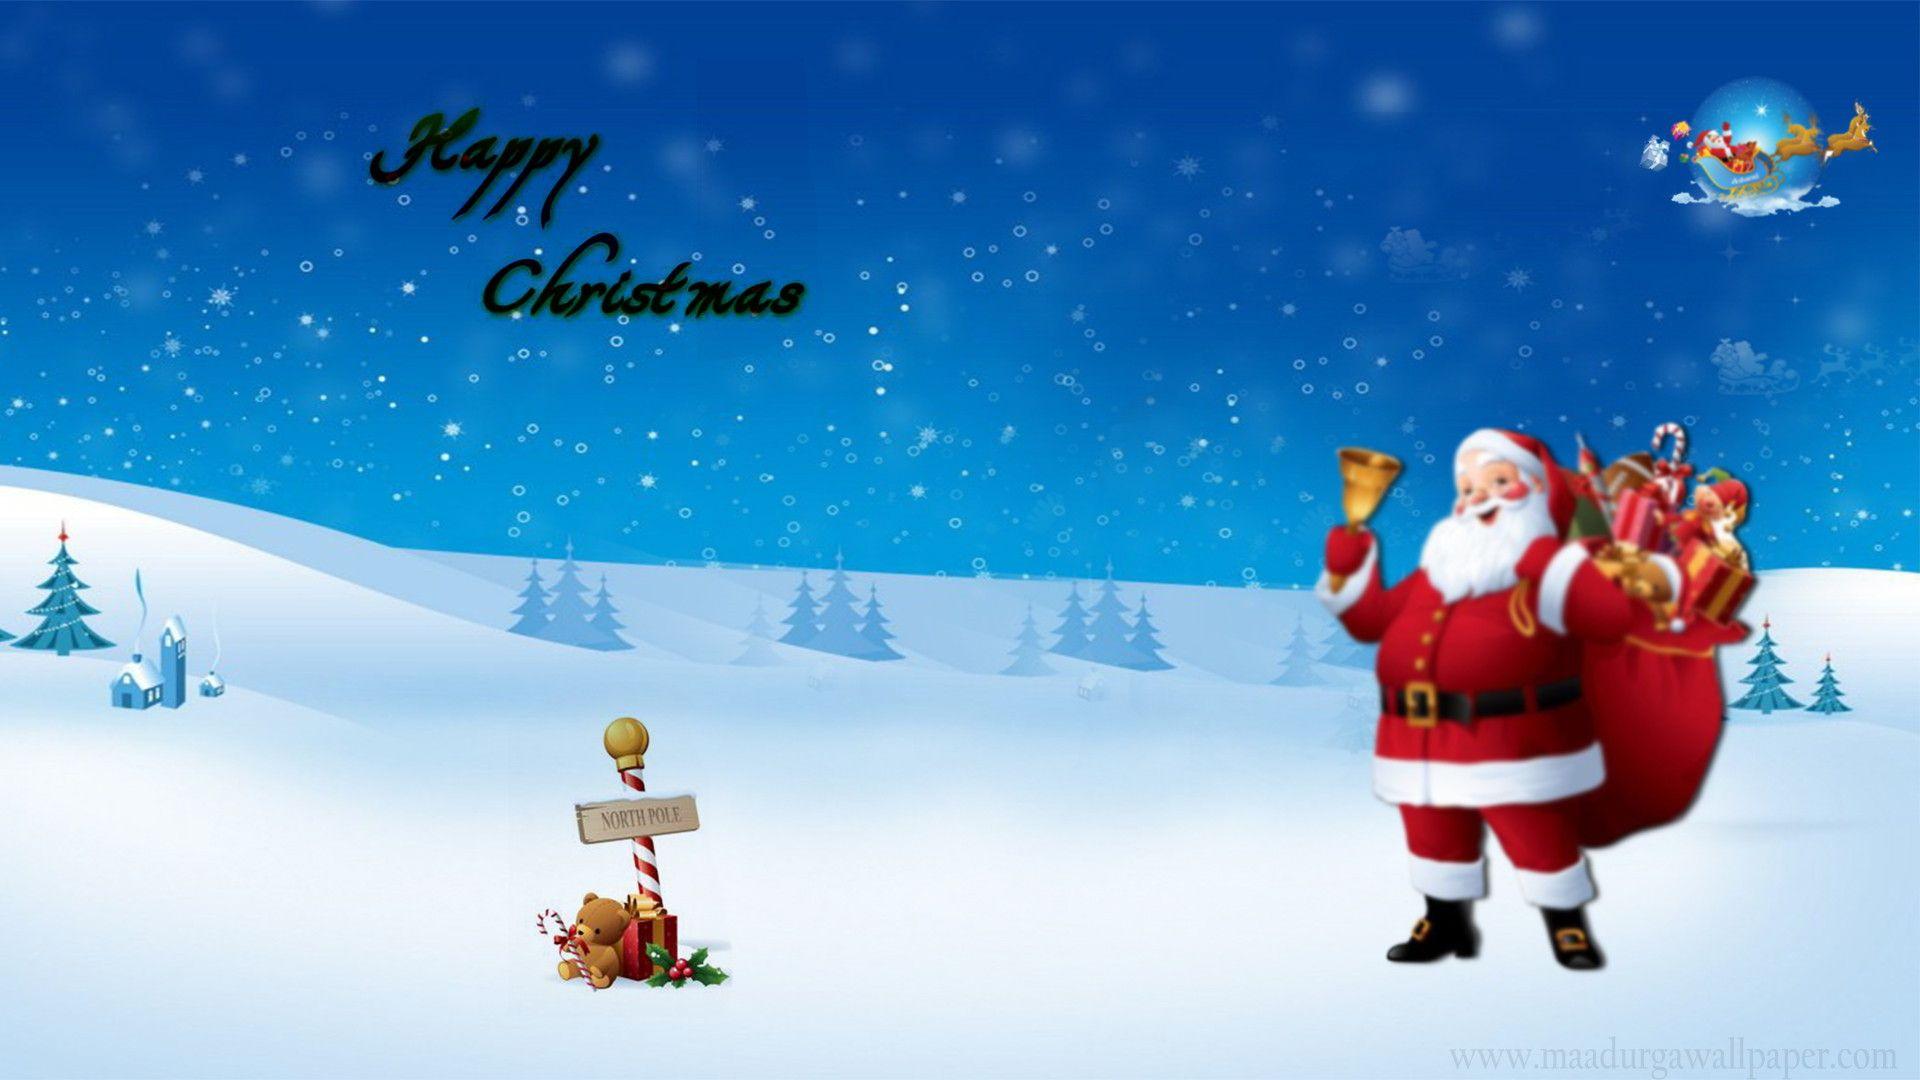 Santa Claus image, beautiful picture & HD photo download free